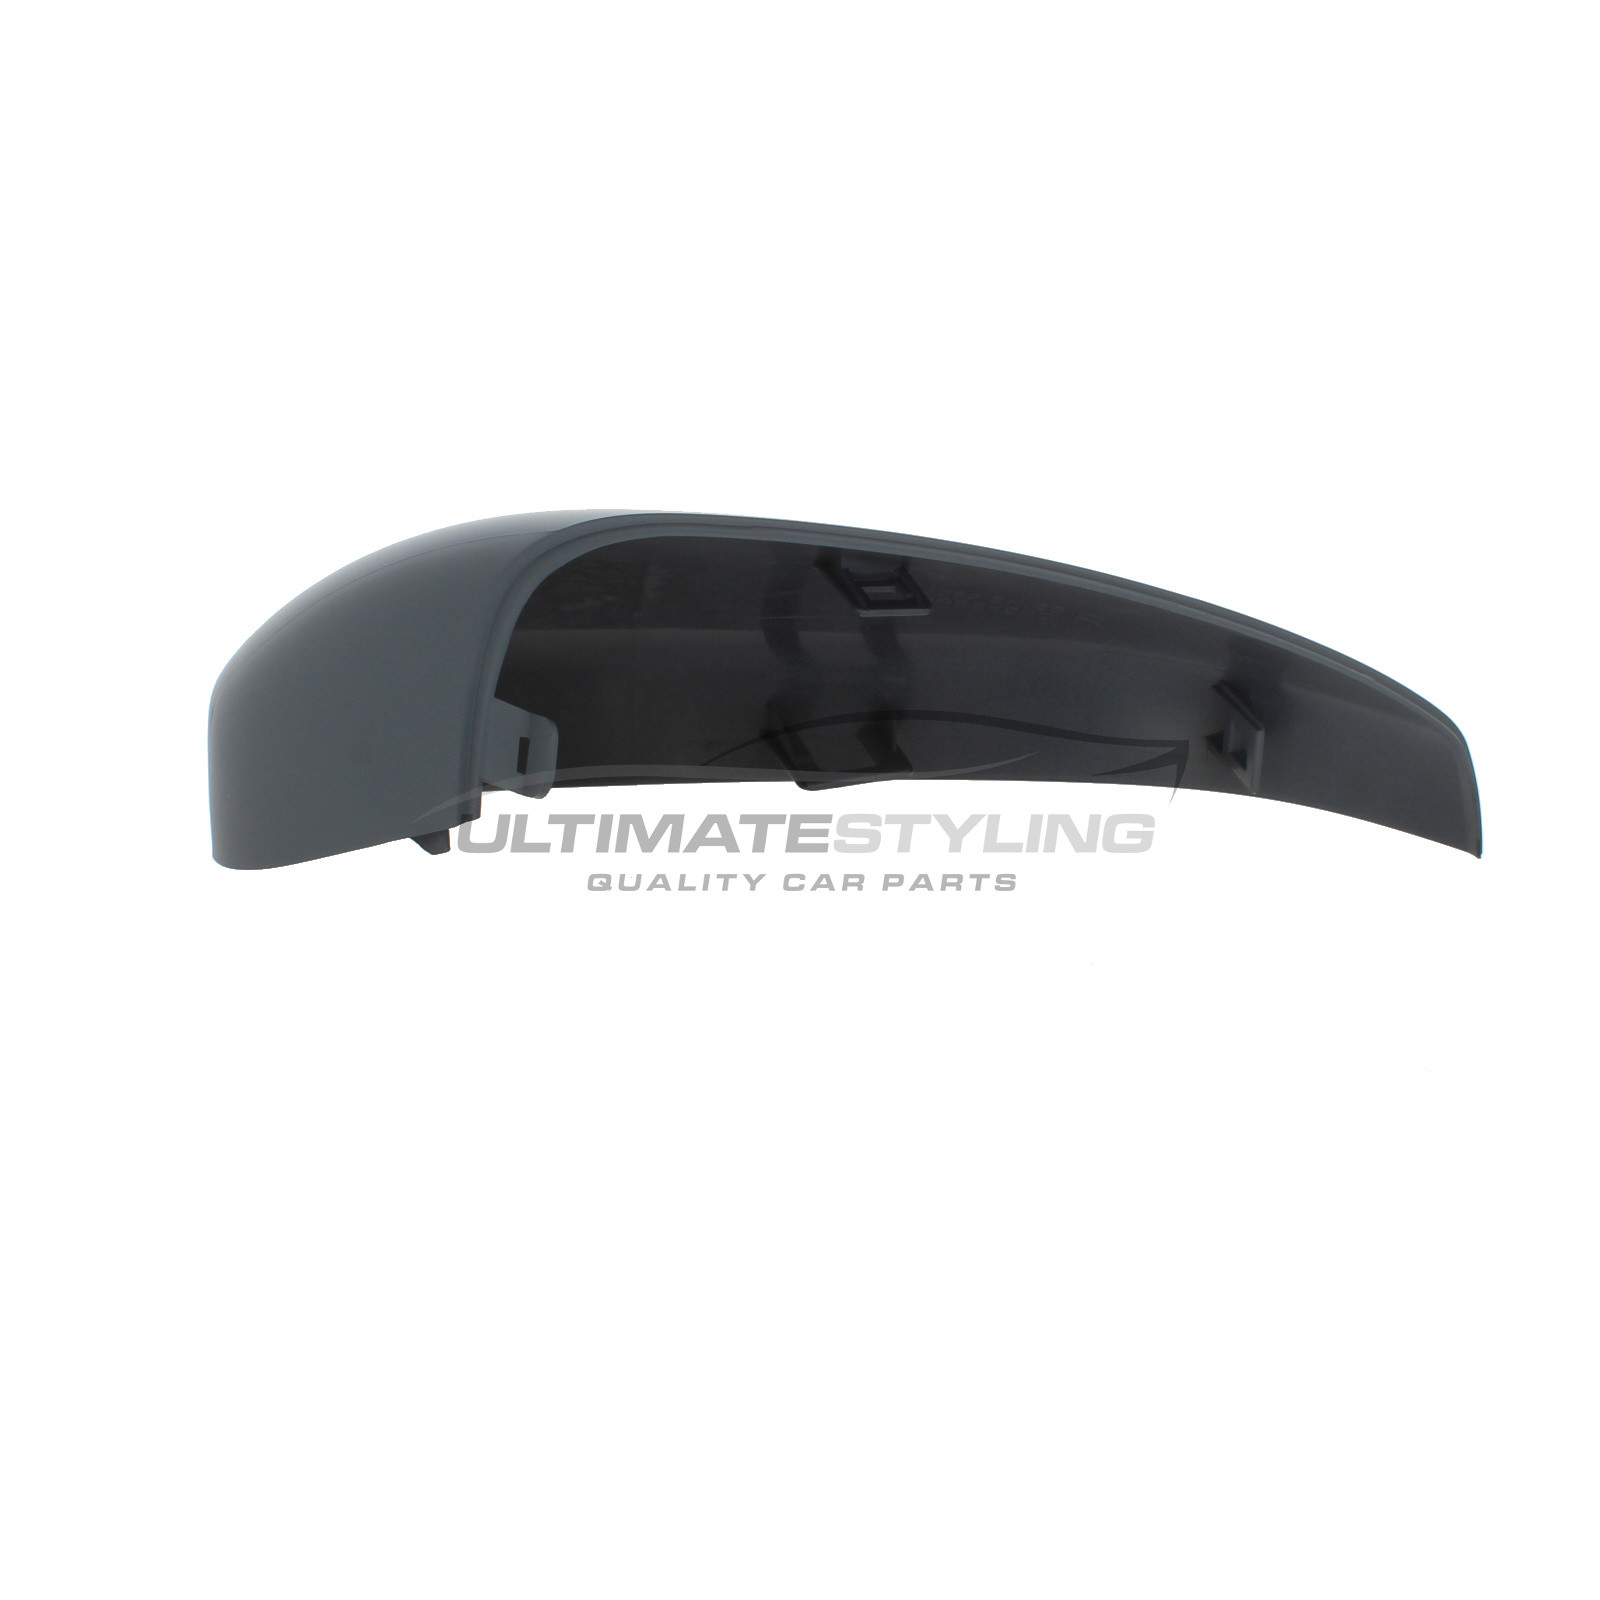 Citroen C5 Aircross, Peugeot 3008 / 5008 Wing Mirror Cover - Drivers Side  (RH) - Primed